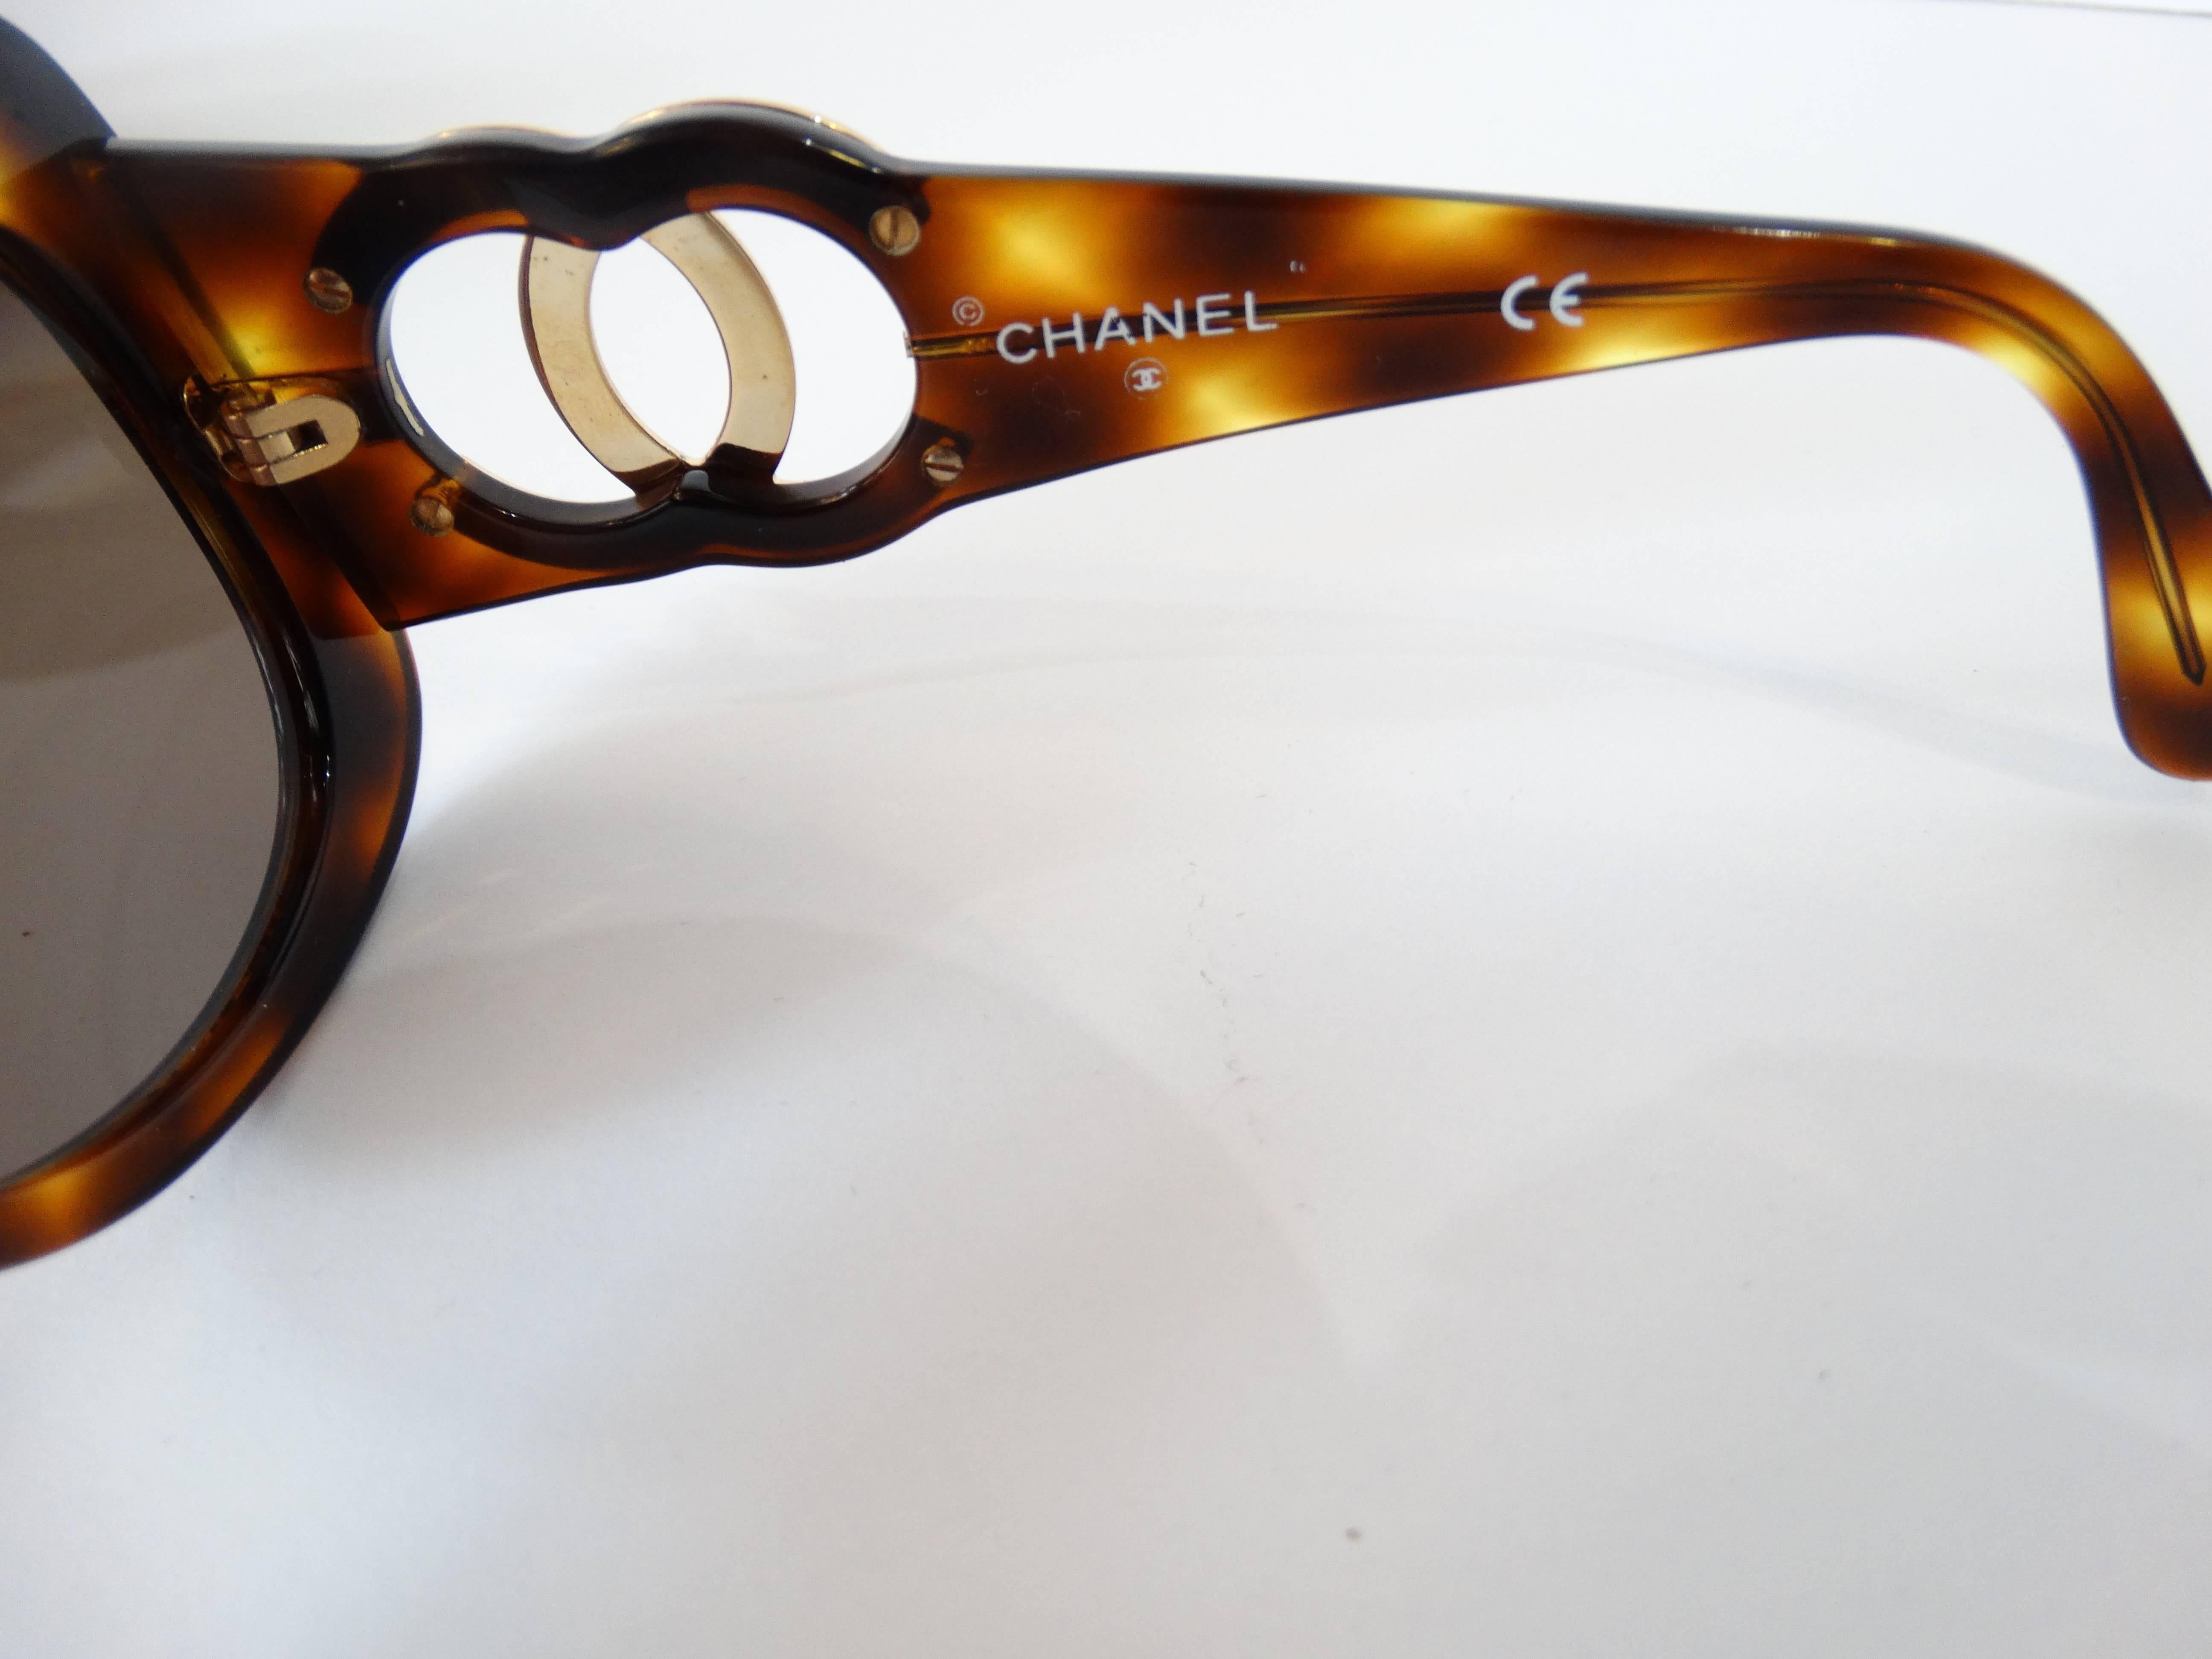 Fabulous 1990s Chanel Tortoise Shell Sunglasses. Mod square shape. Signature Chanel Logo in gold at either arm.Width of glasses from temple to temple is 5 inches. Some of the print on the inside has faded off, part of the id number (first 5 digits)